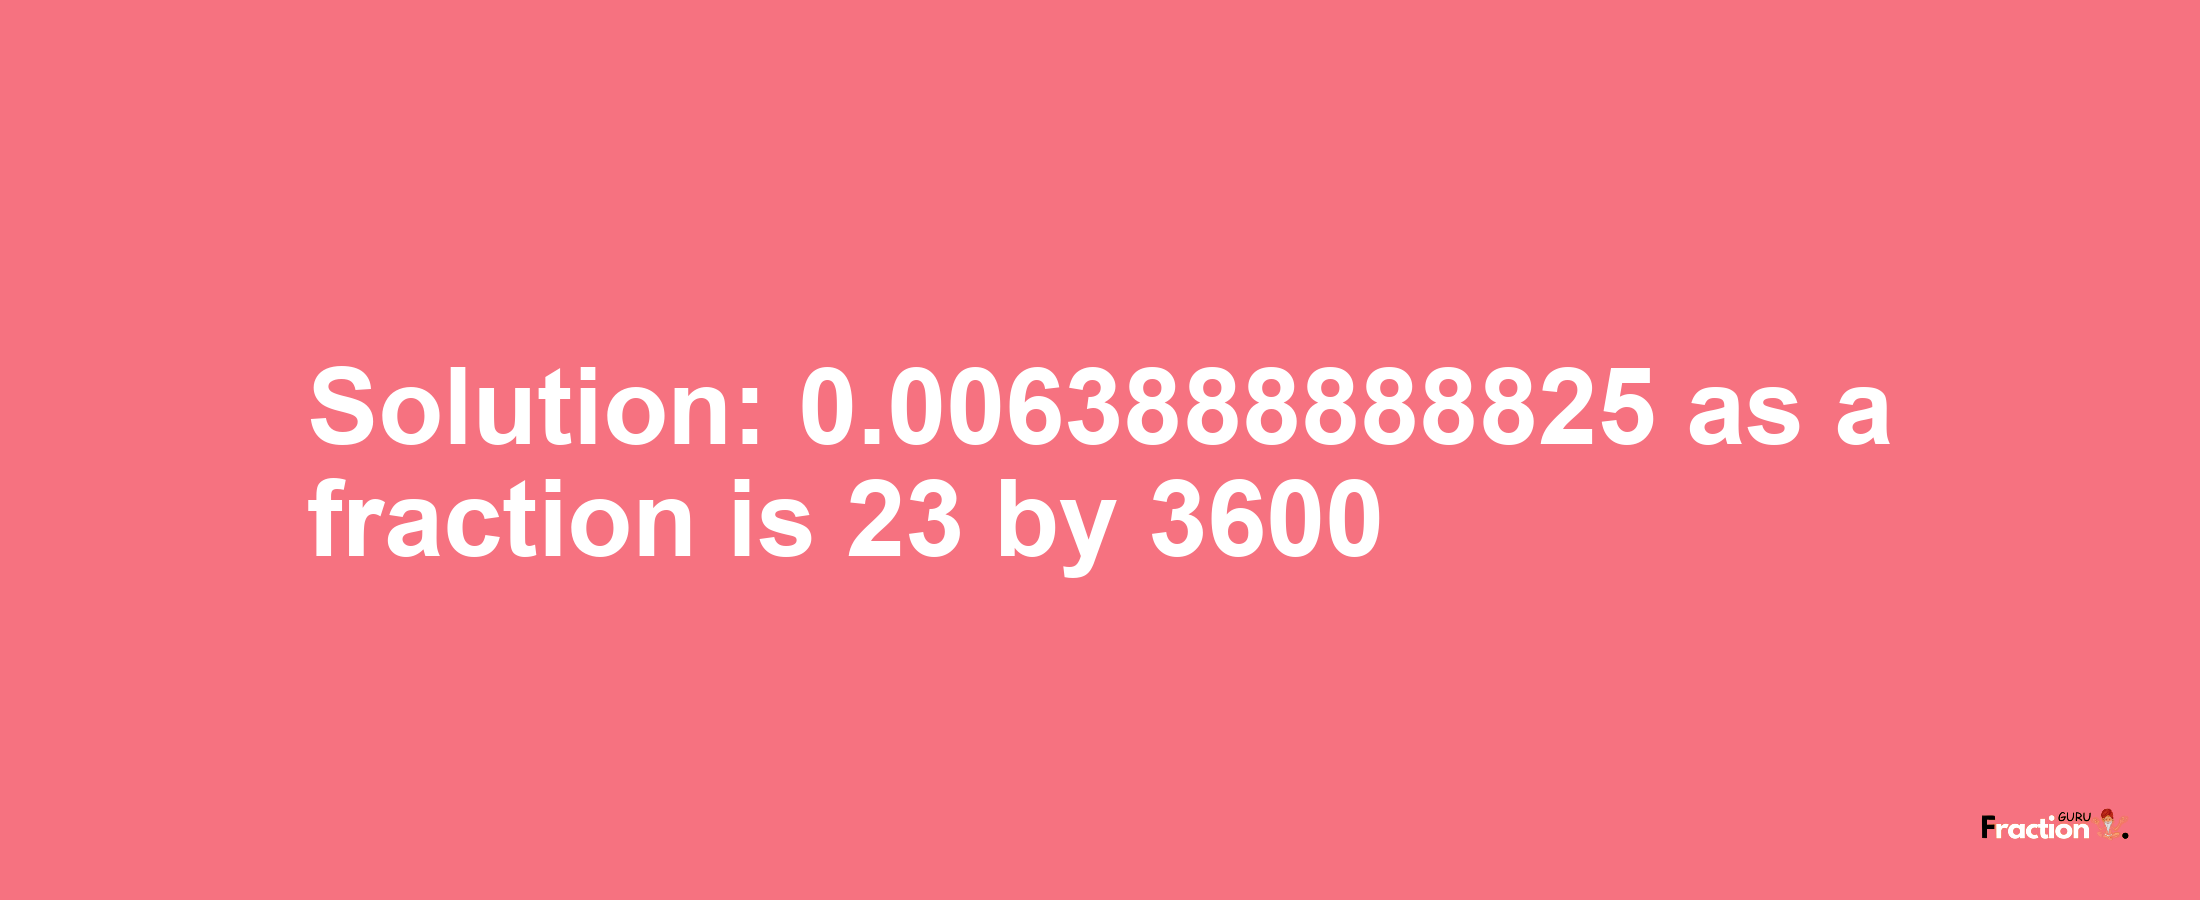 Solution:0.0063888888825 as a fraction is 23/3600